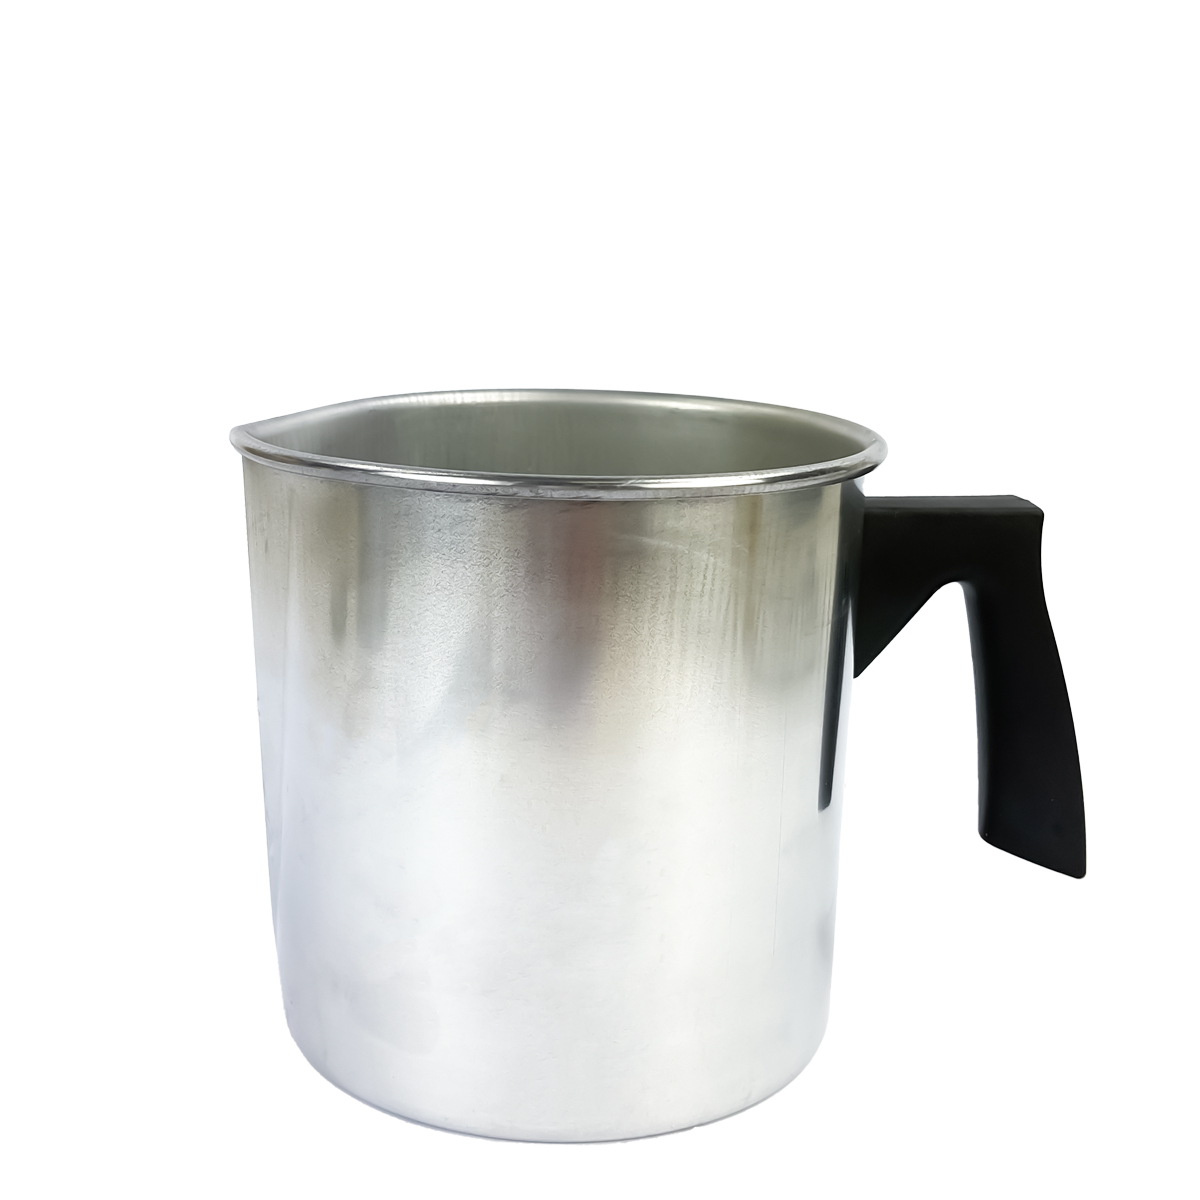 Wax Melting Pot Small Stainless Steel Double Boiler Jug Candle Making 480ml 